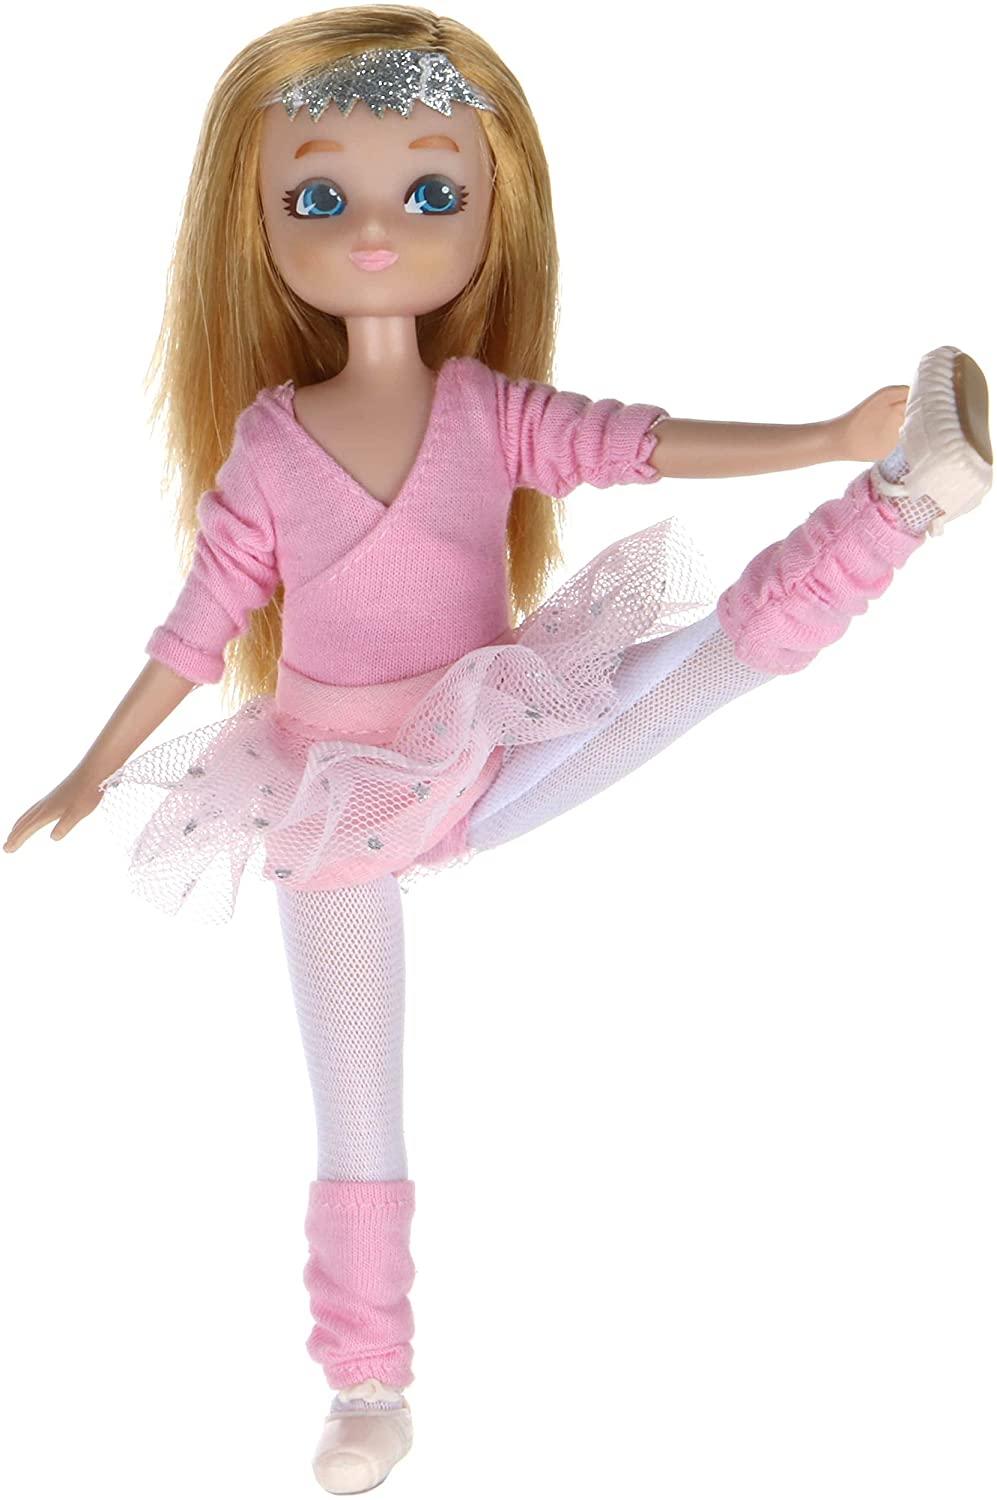 Lottie Doll Ballet Doll with pink ballet outfit including tutu, cardigan leg warners and ballet shoes.